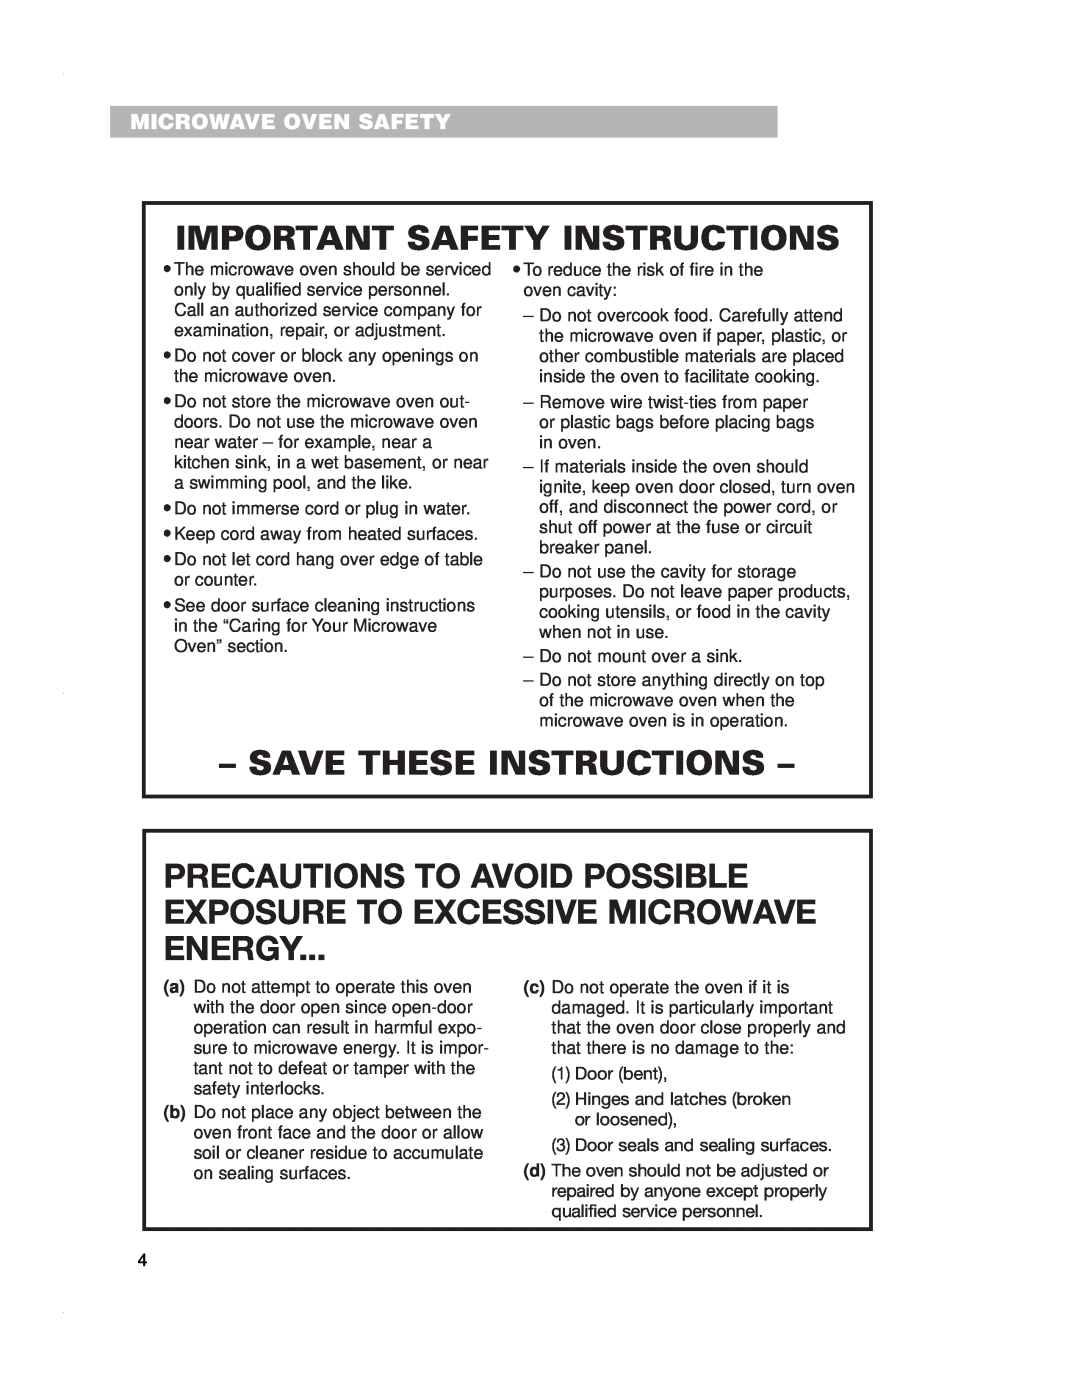 Crosley CMT135SG installation instructions Microwave Oven Safety, Important Safety Instructions, Save These Instructions 